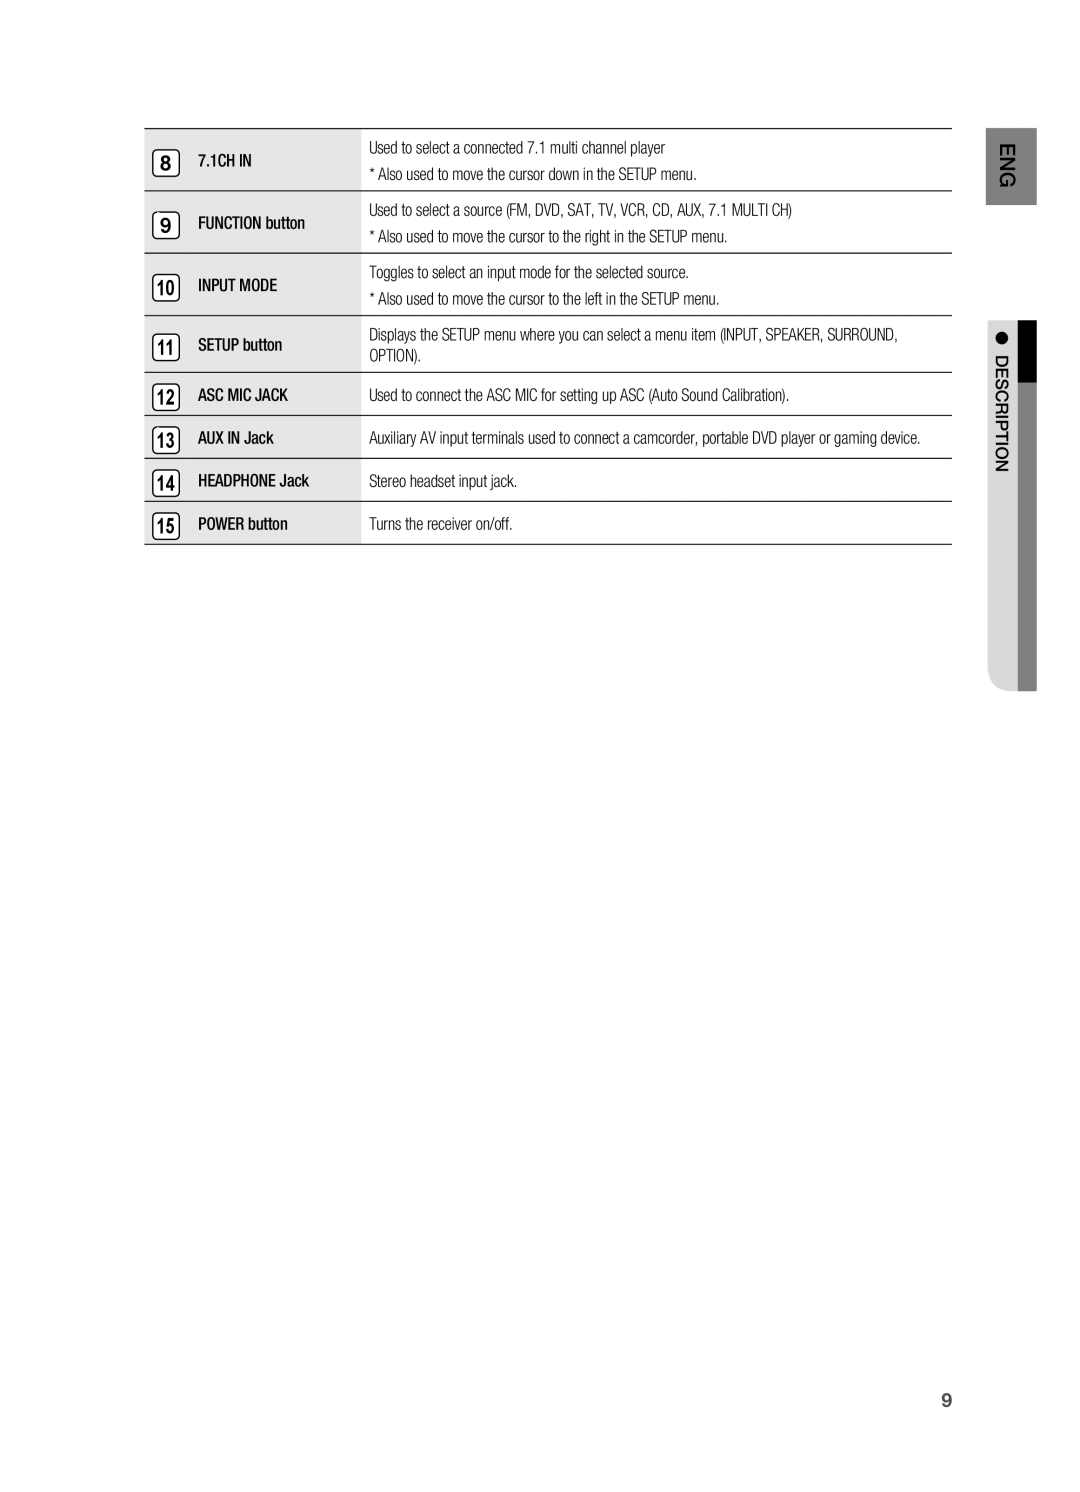 Samsung HT-AS730S user manual 7.1CH IN 